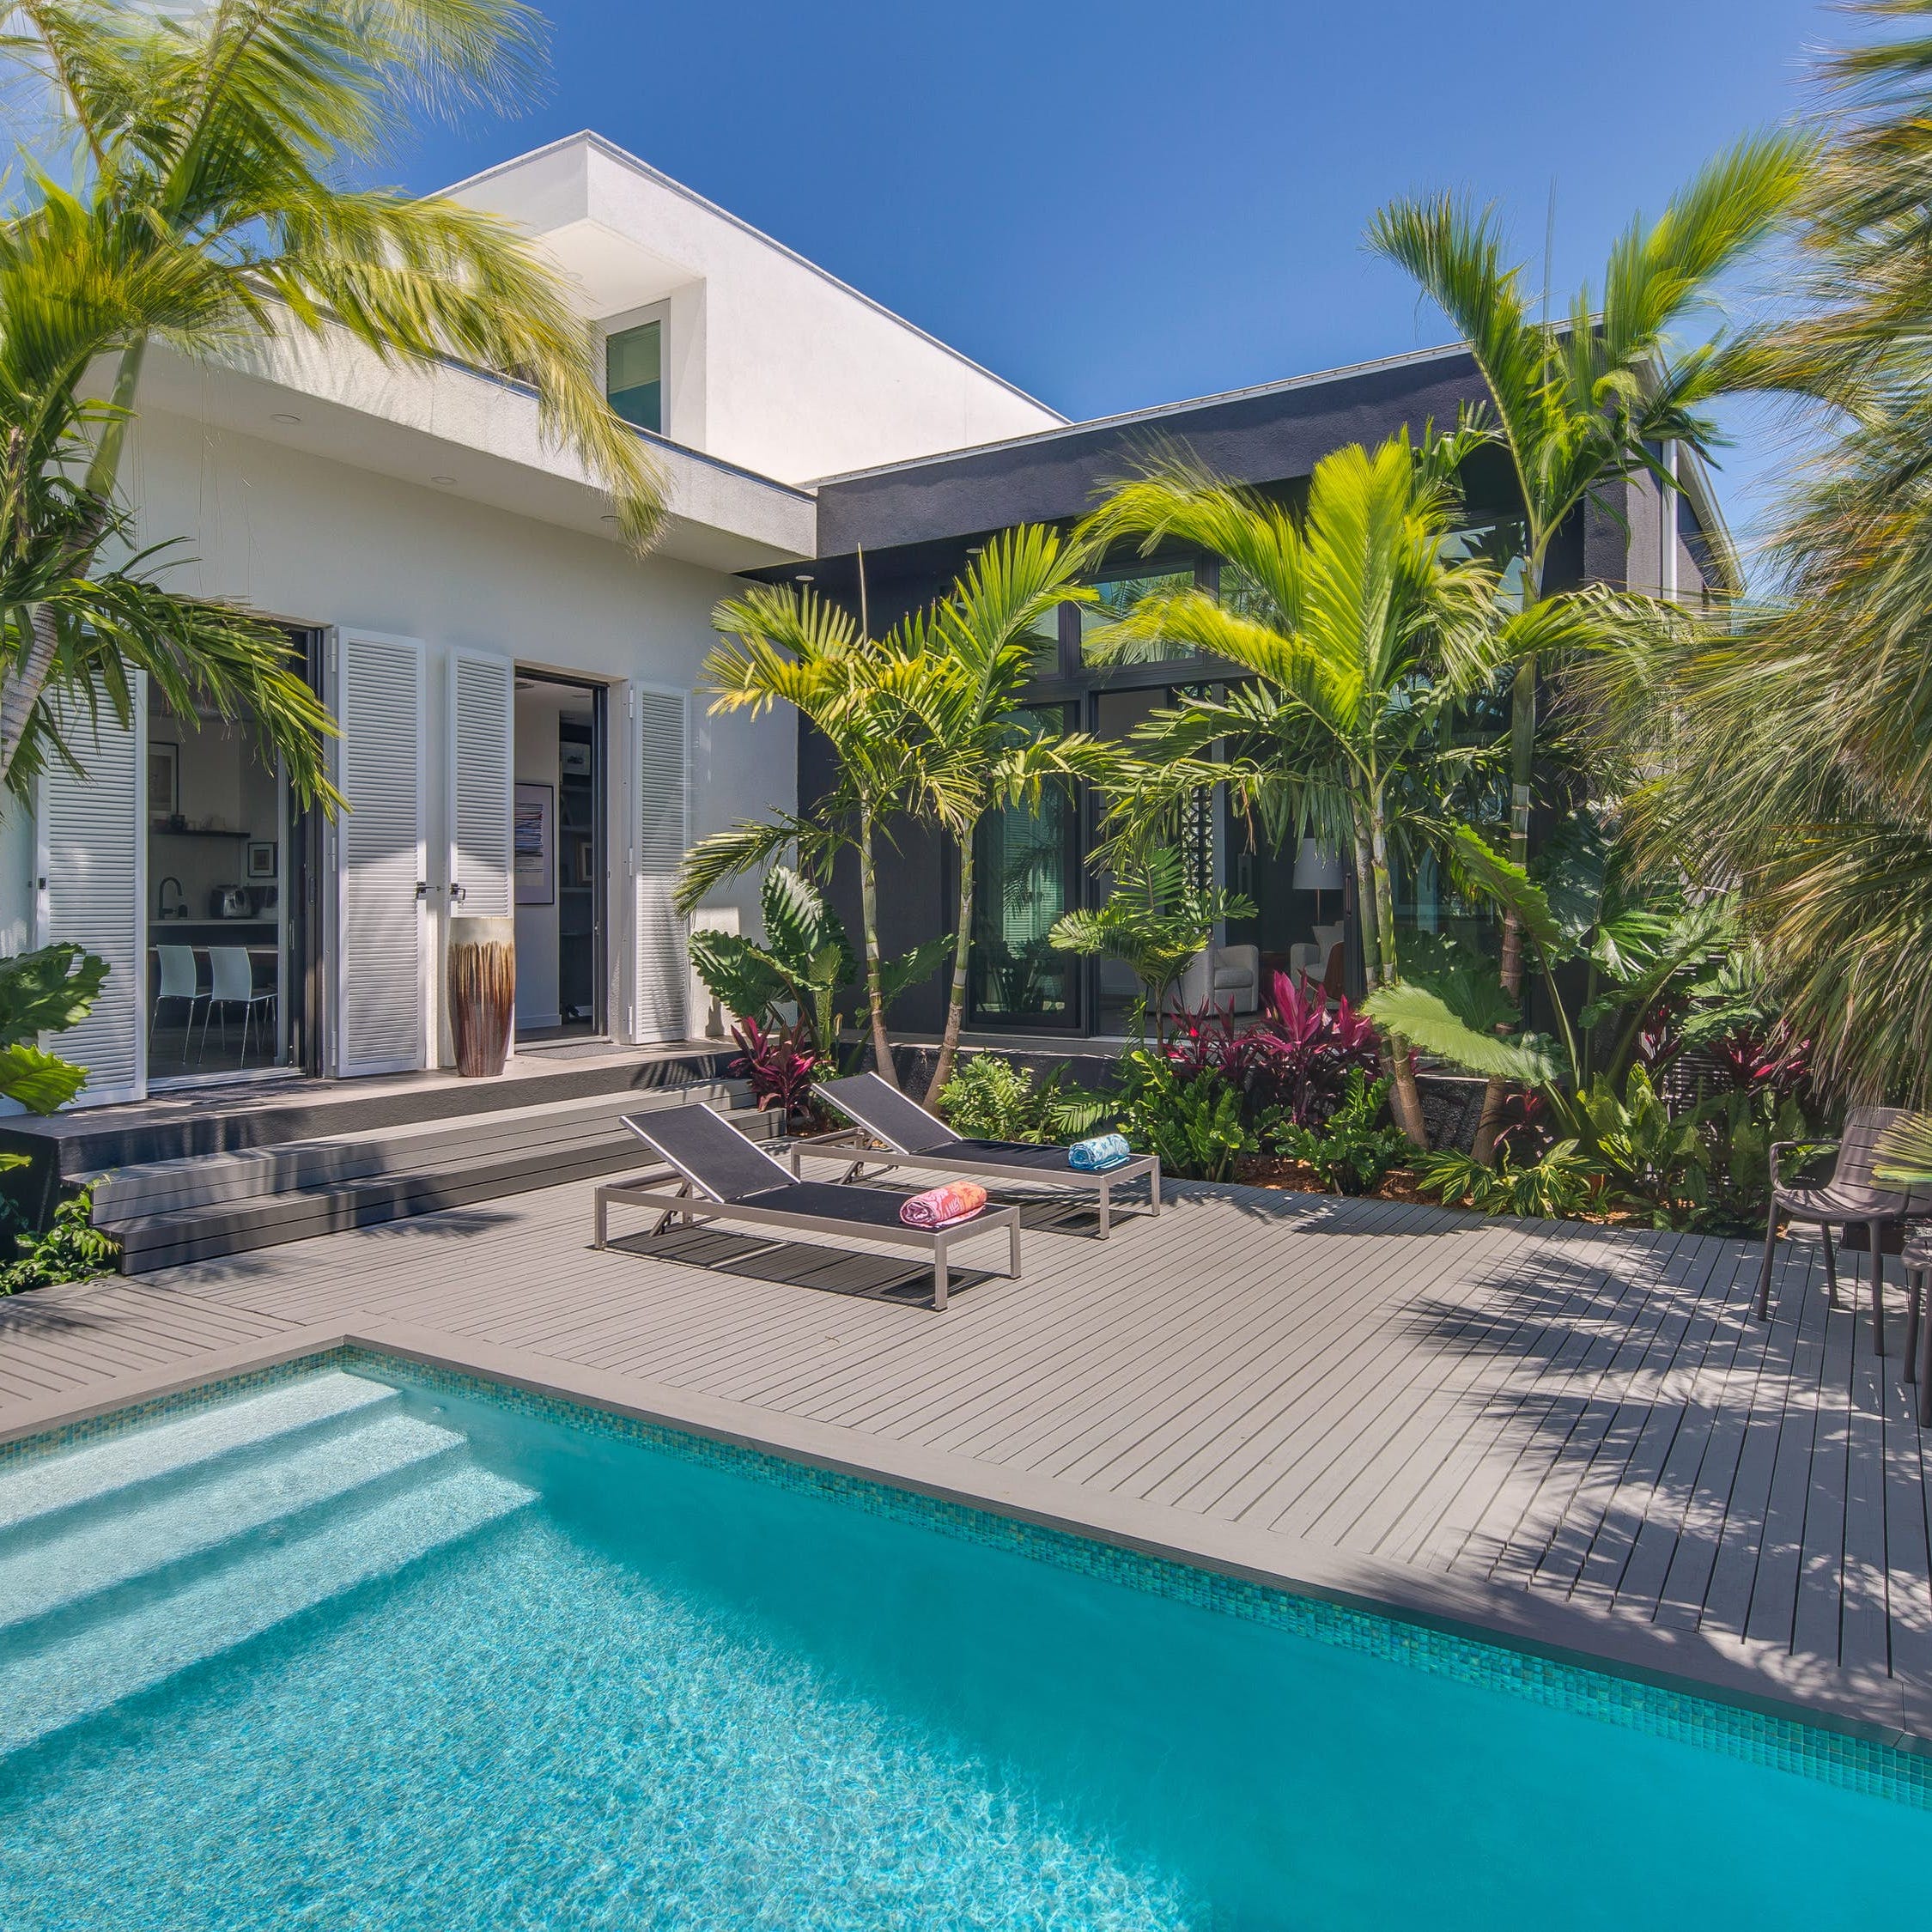 Key West, Florida, is the No. 13 top market to buy a vacation rental. Modern Rendezvous is a two-bedroom home with a private pool near Higgs Beach, fishing piers and the Key West Nature Preserve.